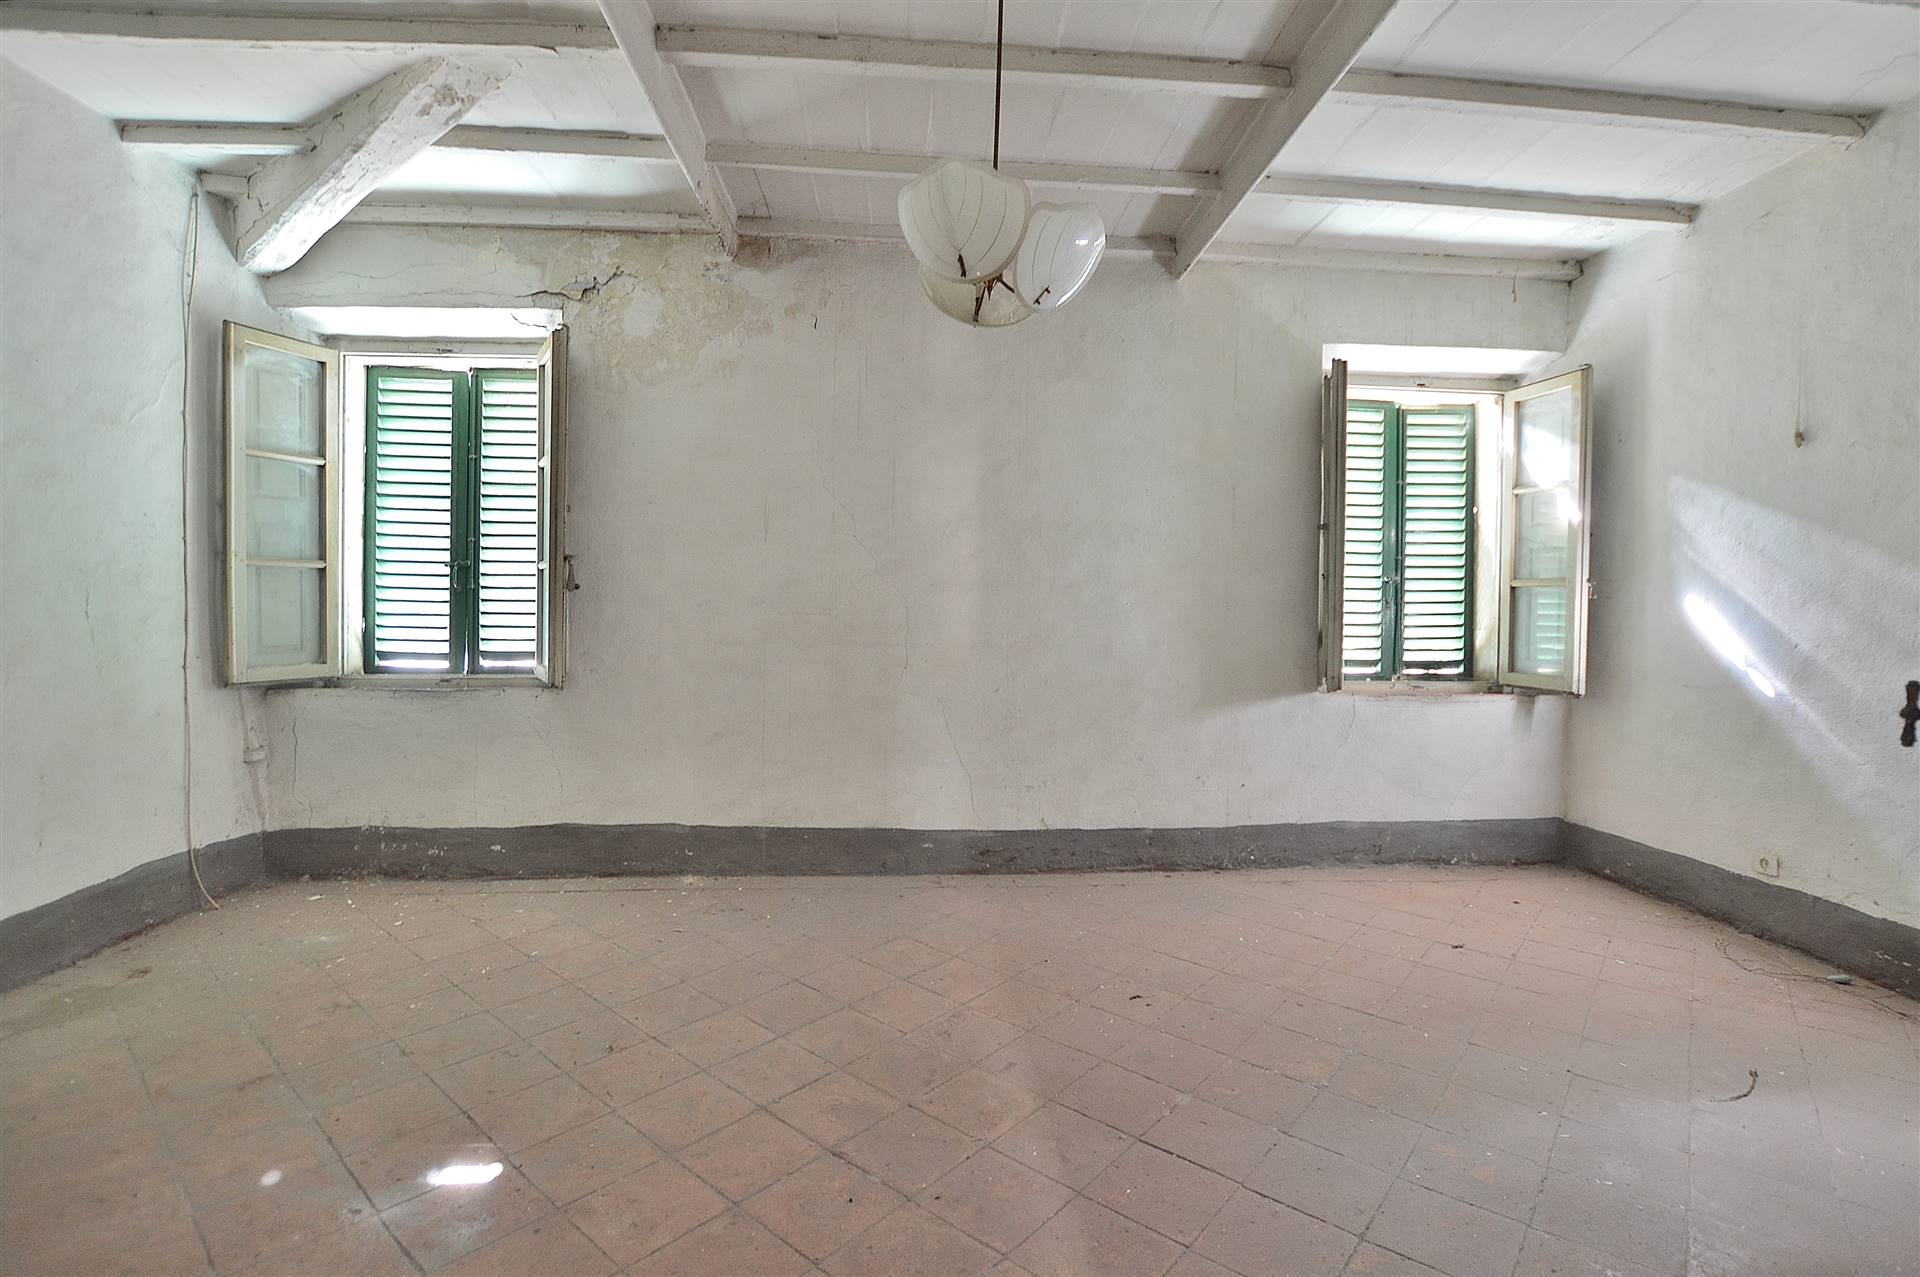 CASCIANO DI MURLO, MURLO, Apartment for sale of 183 Sq. mt., Be restored, Heating Individual heating system, Energetic class: G, Epi: 175 kwh/m2 year,